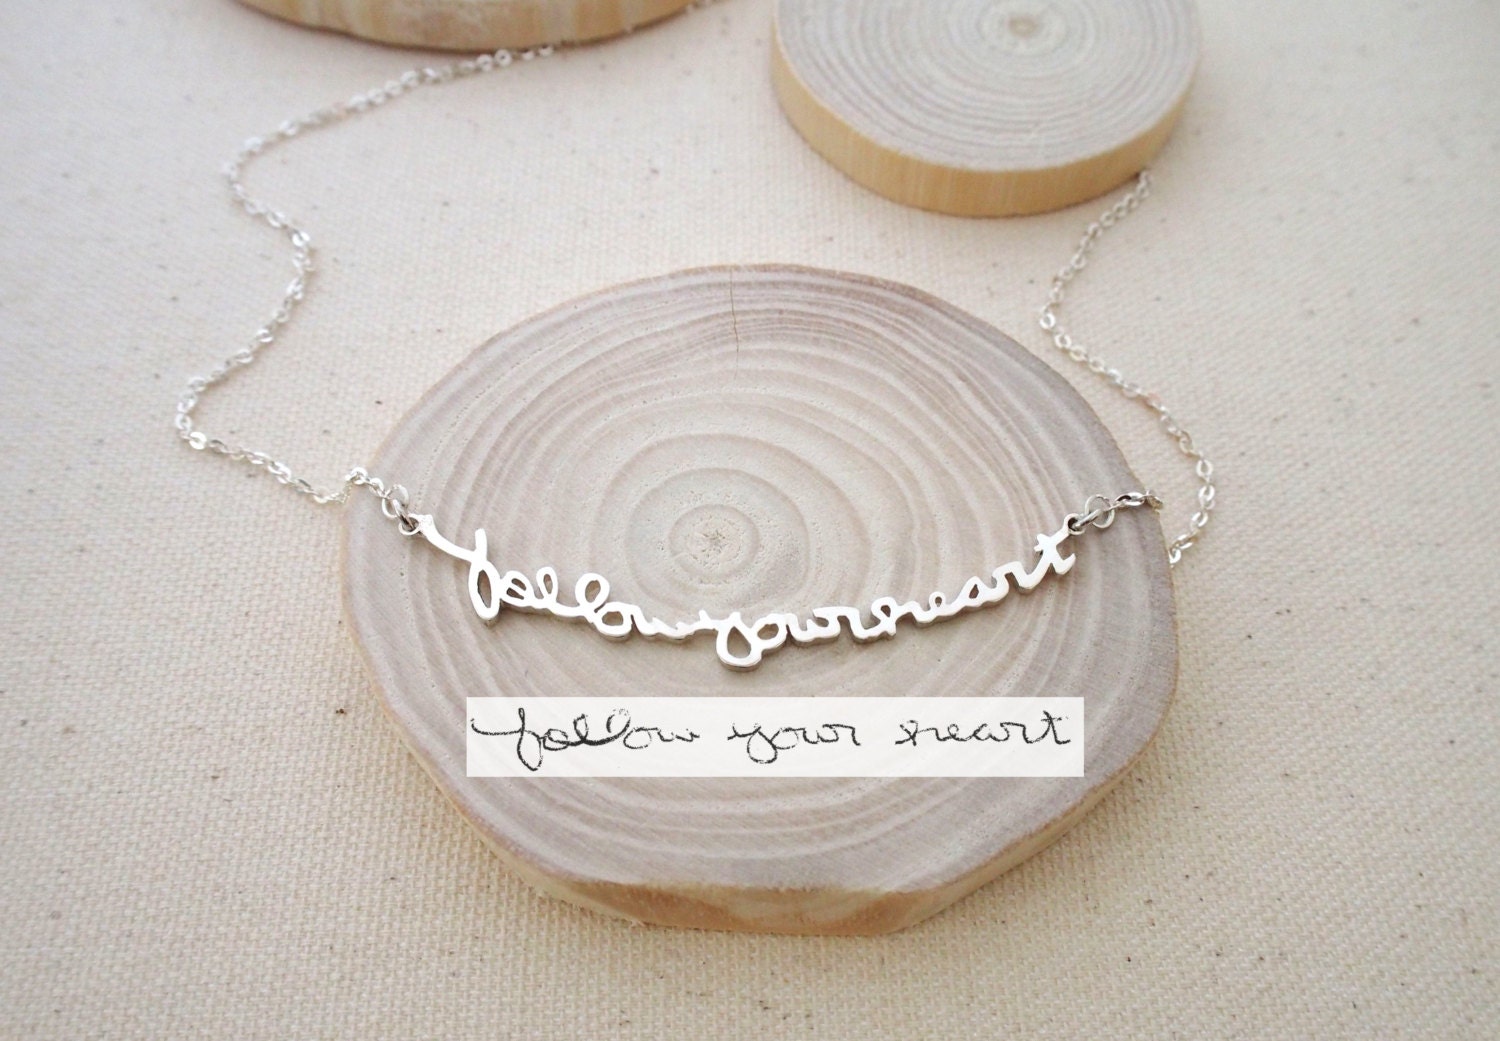 Memorial Signature Necklace Personalized Handwriting Keepsake Jewelry in Sterling Silver Mother Gift Grandma Gift Nh01